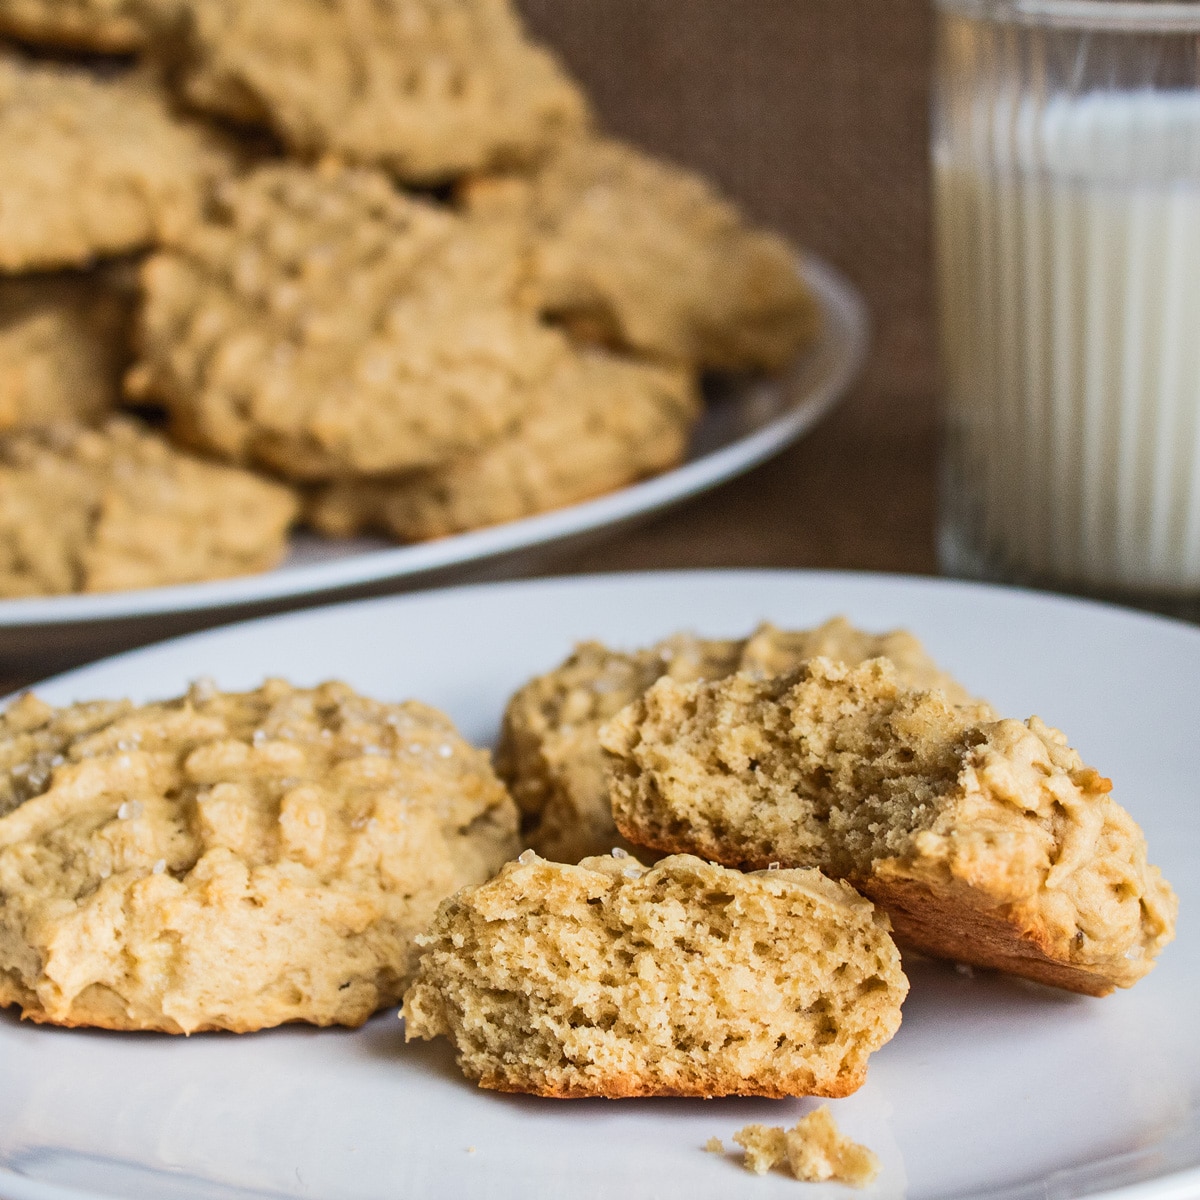 Easy peanut butter banana cookies served up in just 20 minutes with milk.